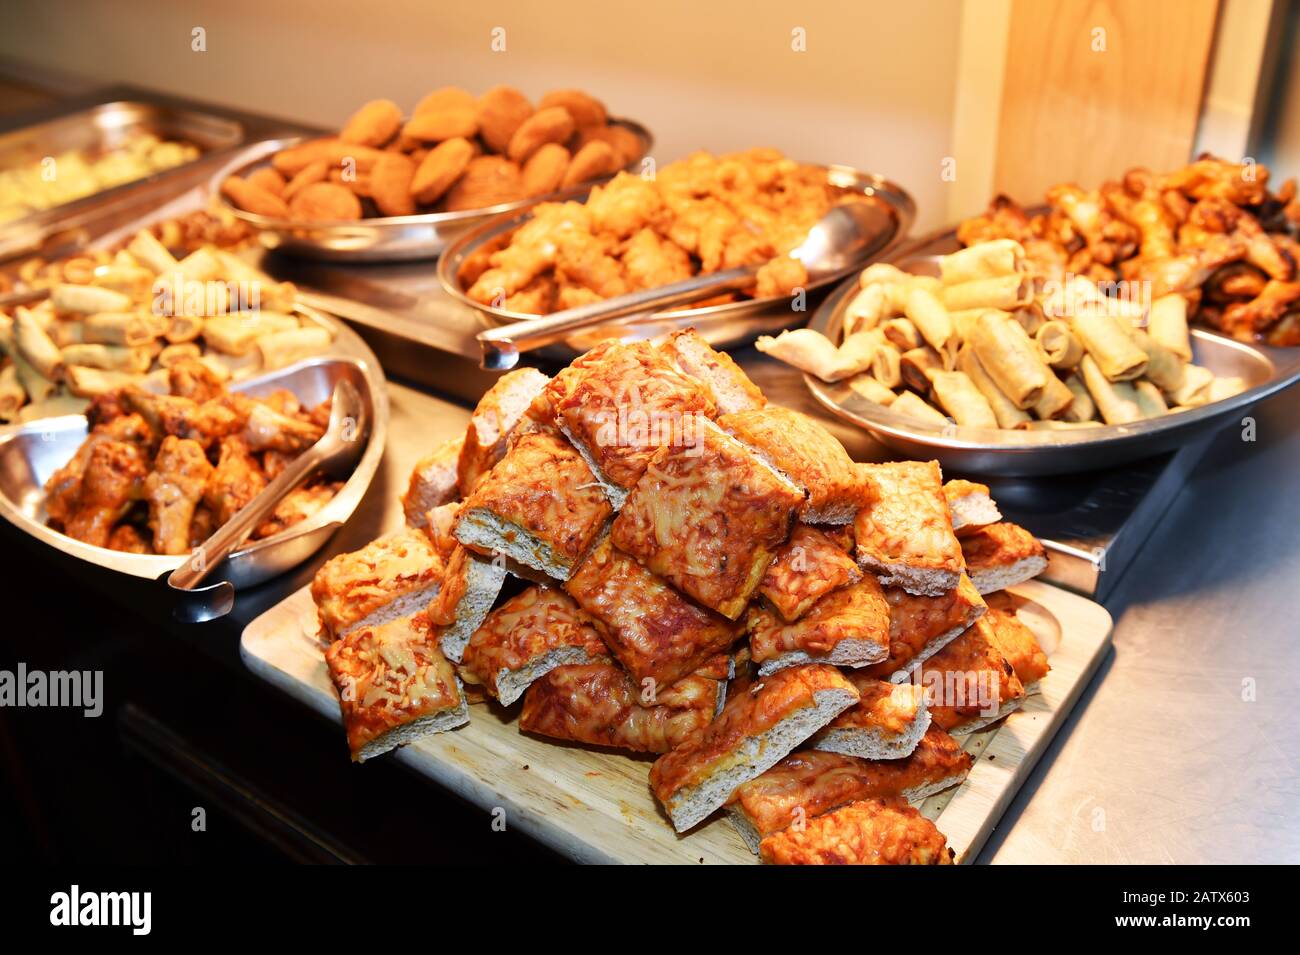 Hot buffet of pizza and fried chicken  UK Stock Photo